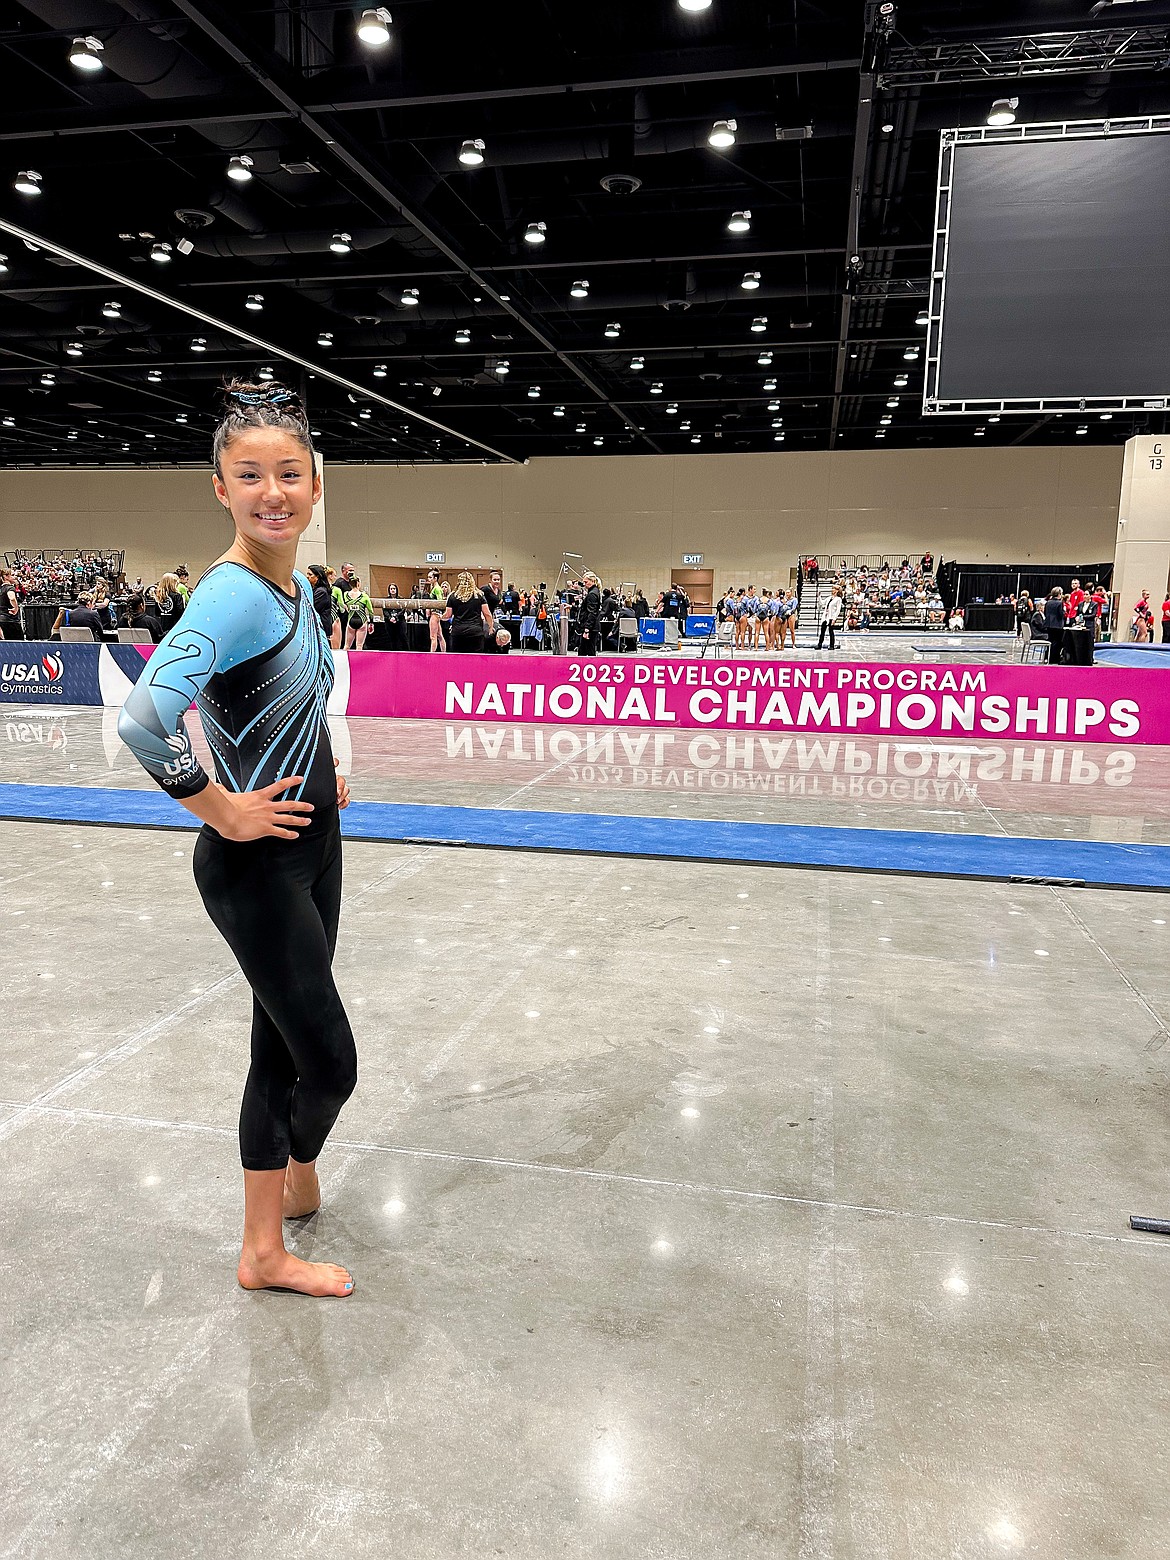 Courtesy photo
Avant Coeur Gymnastics Maiya Terry competed at the 2023 Developmental National Championships in Oklahoma City against Level 10s from all over the country. Maiya had a high of 9.45 on Vault and a high of 9.3 on Bars.